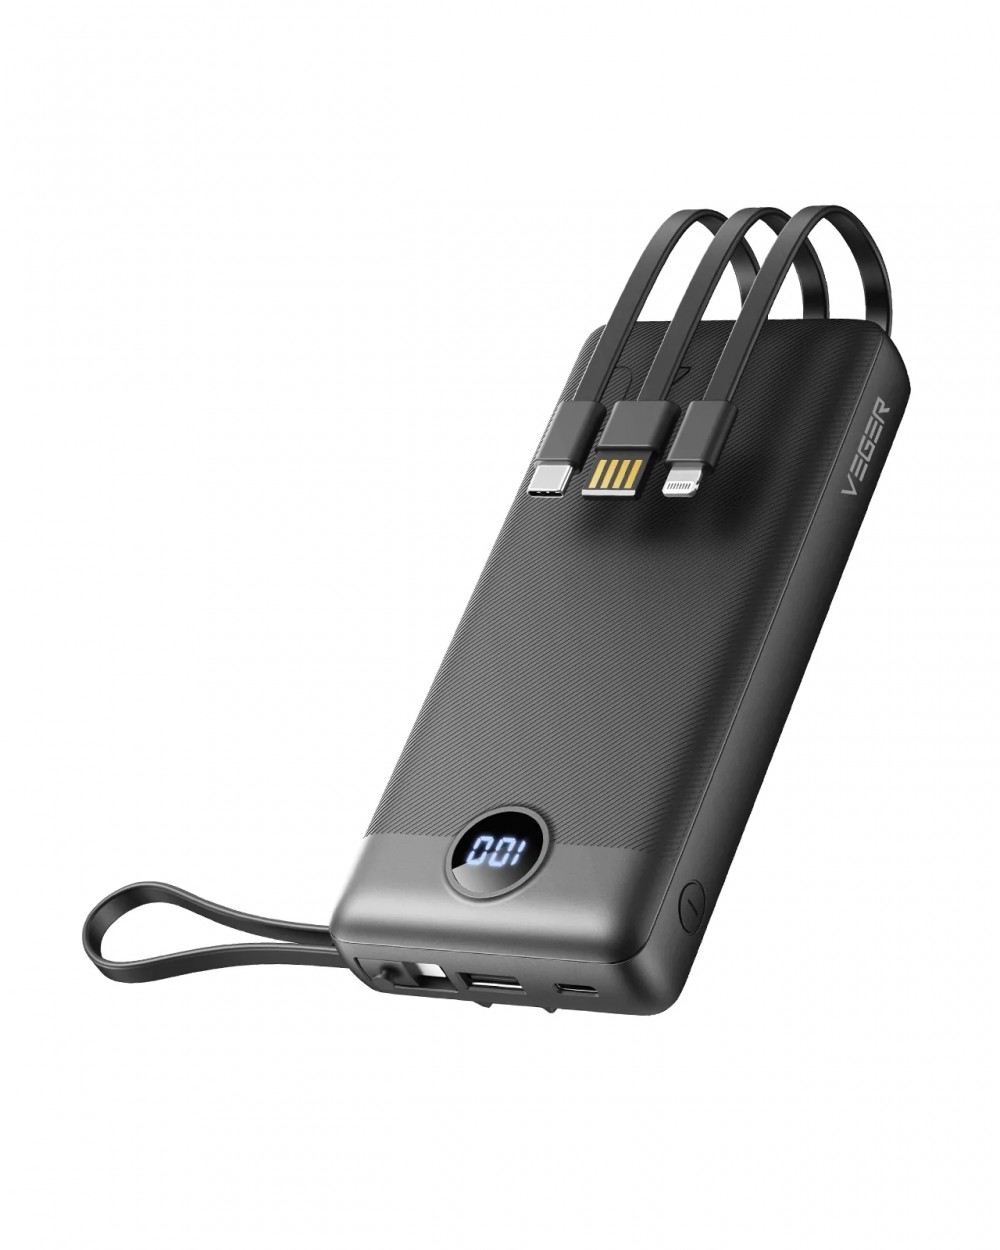 Veger C20 power bank - 20000mAh - built-in, 4 cables, LED ch